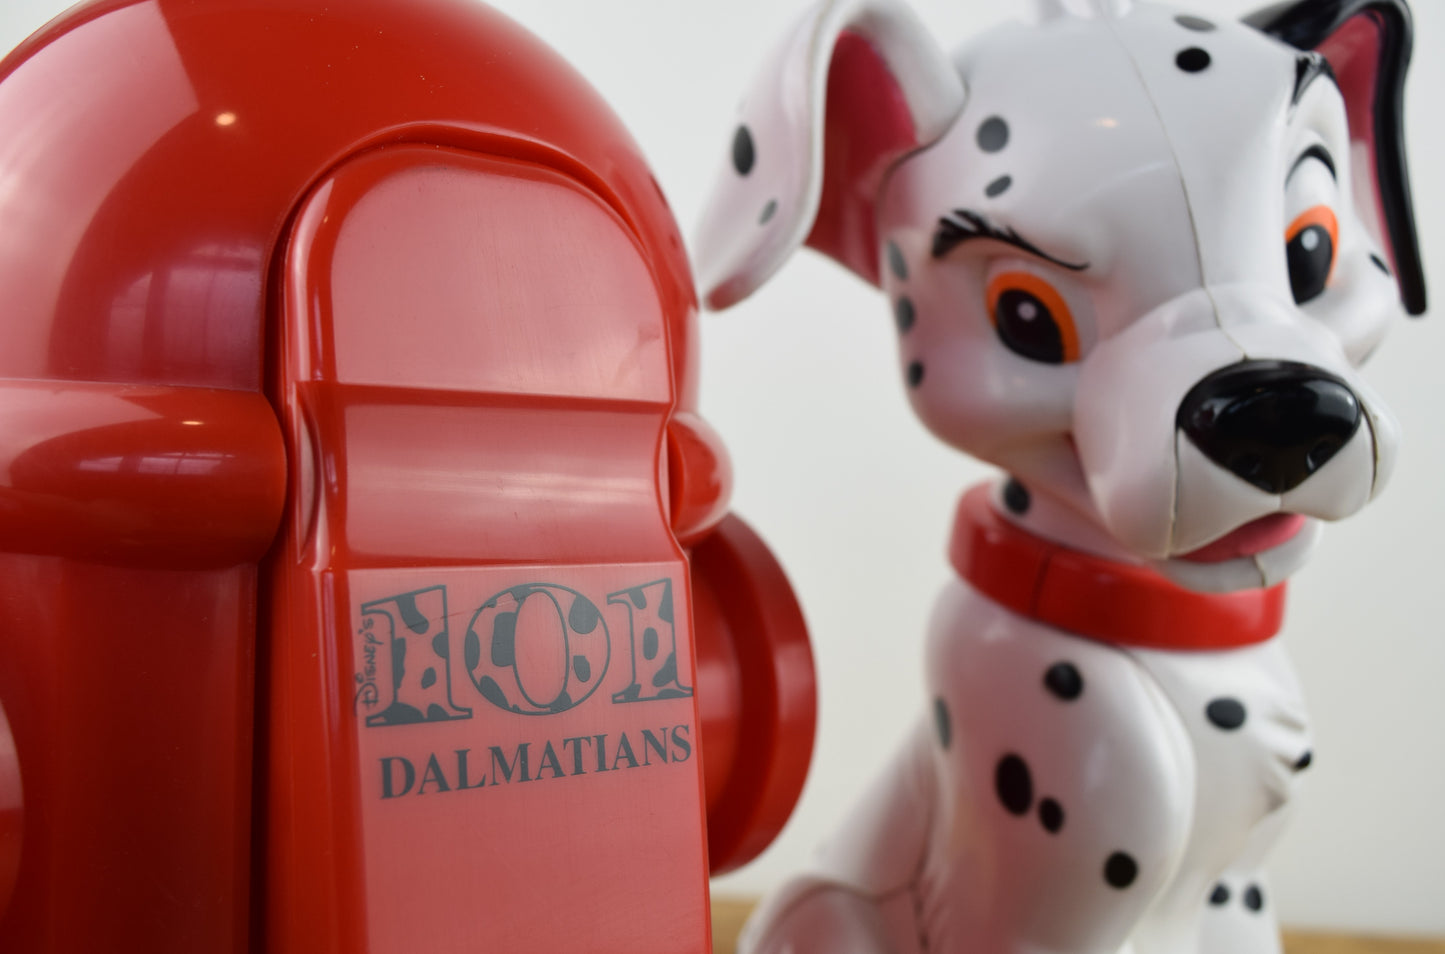 101 Dalmations Telephone with Fire Hydrant